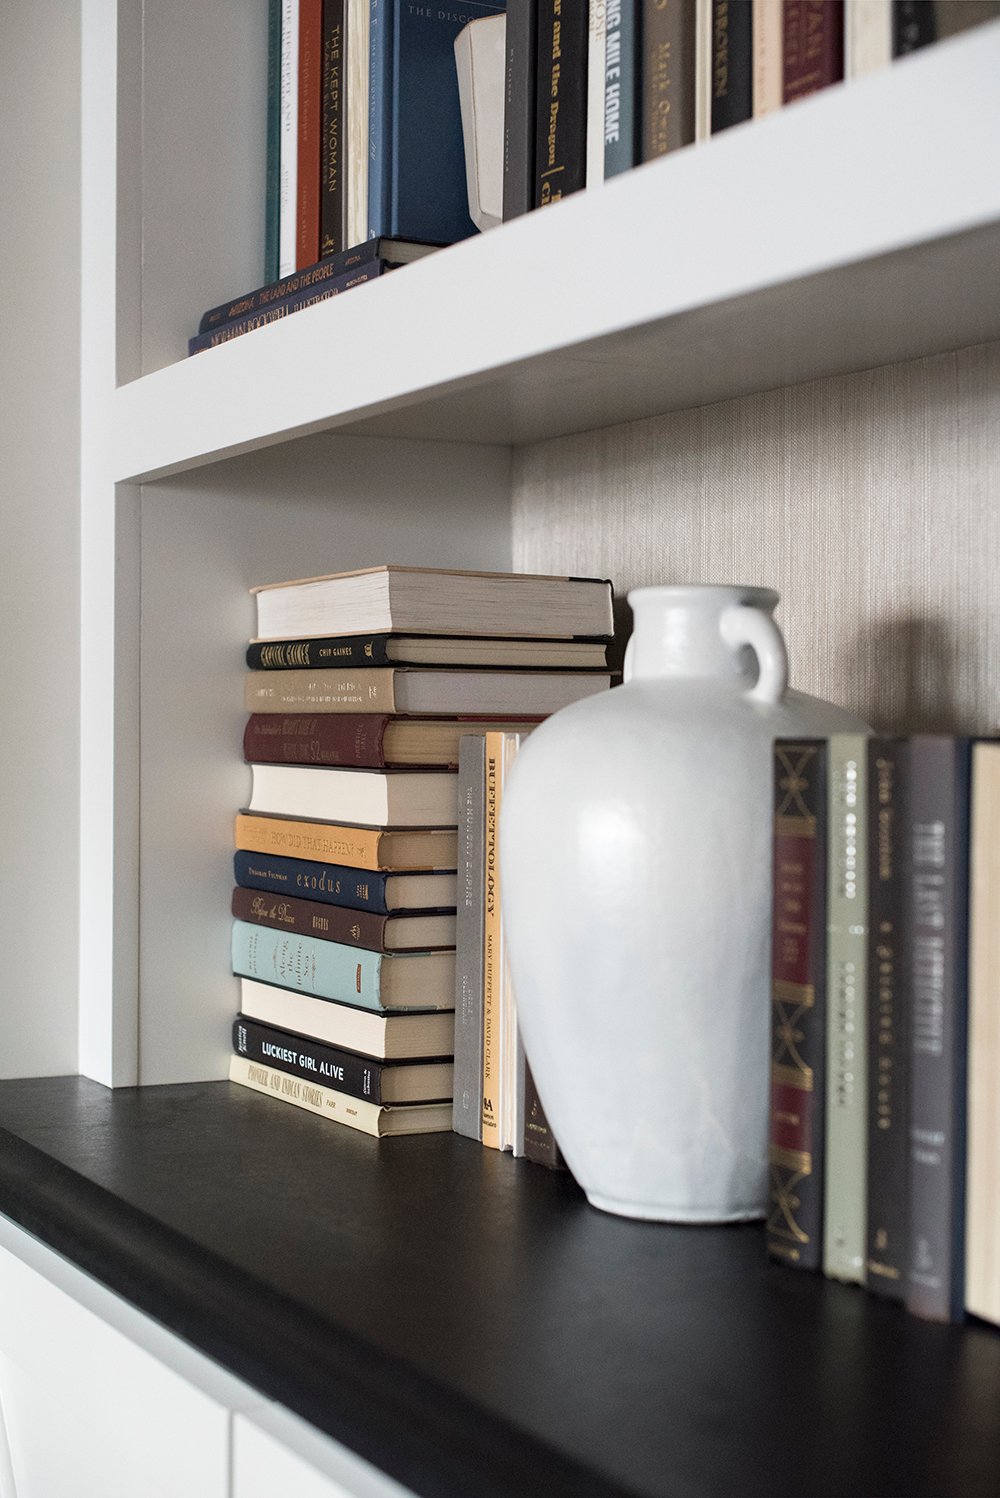 Design Discussion : Shelf Styling with Books - roomfortuesday.com